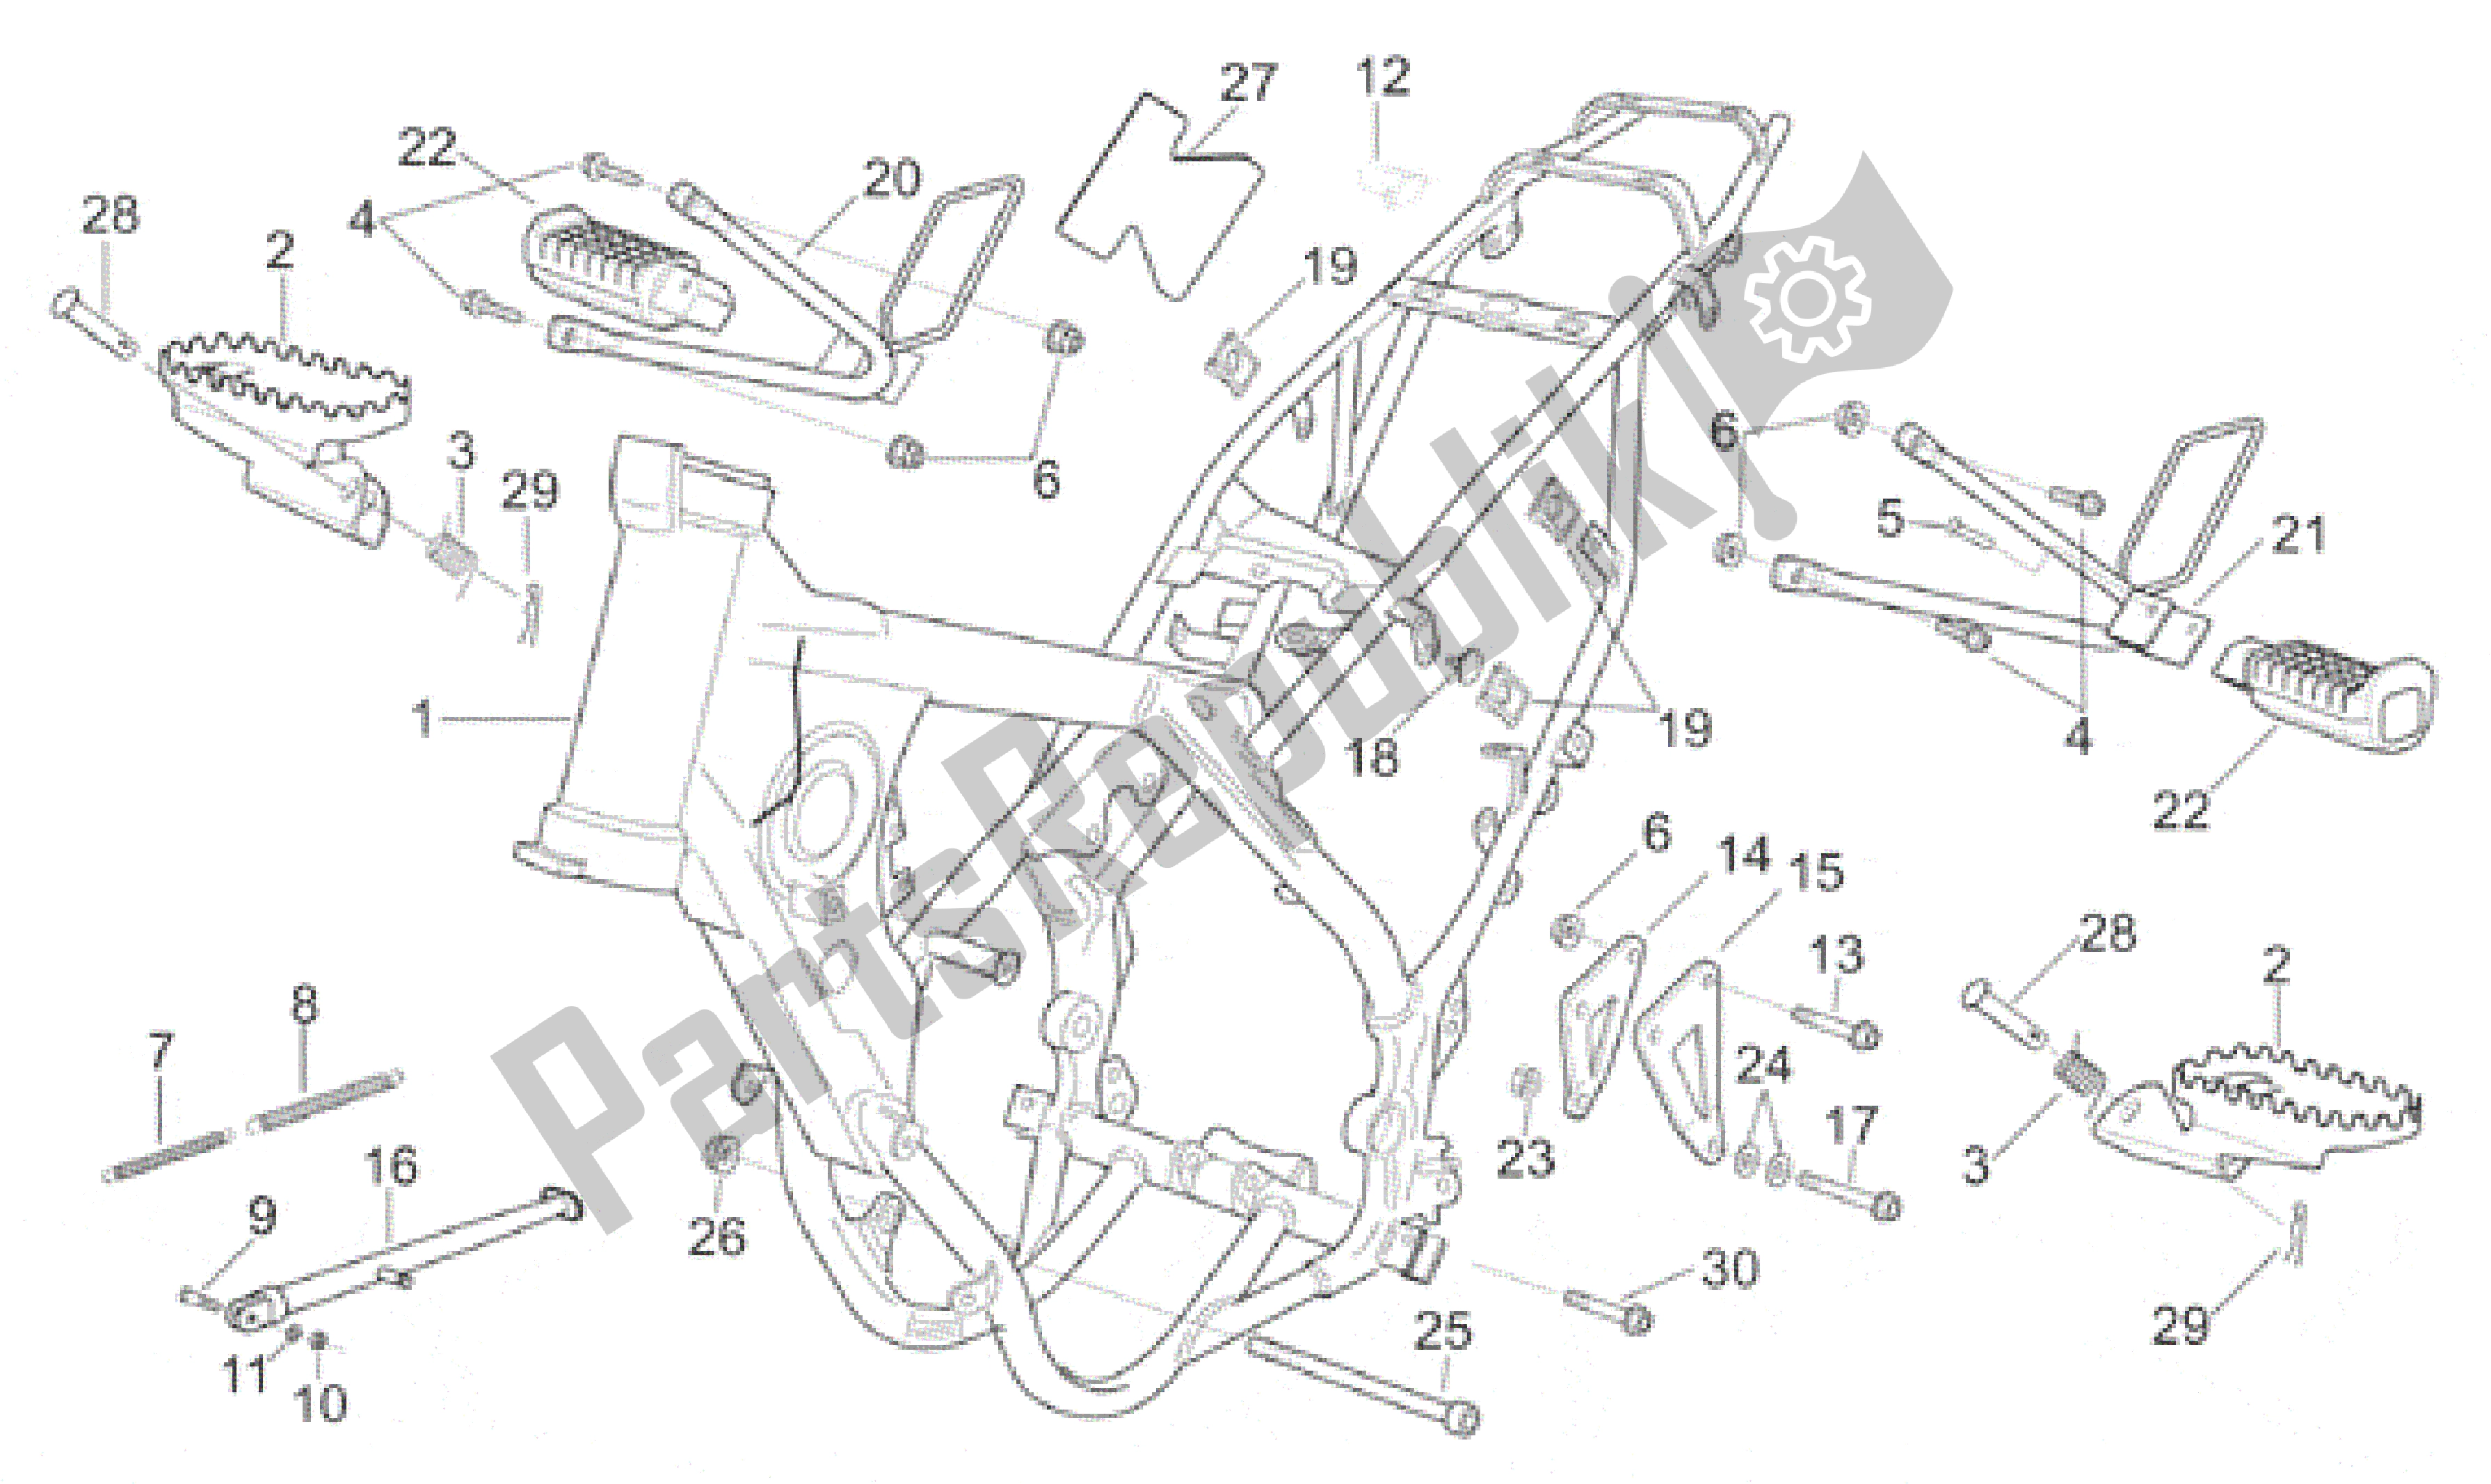 All parts for the Frame of the Aprilia ETX 125 1999 - 2001